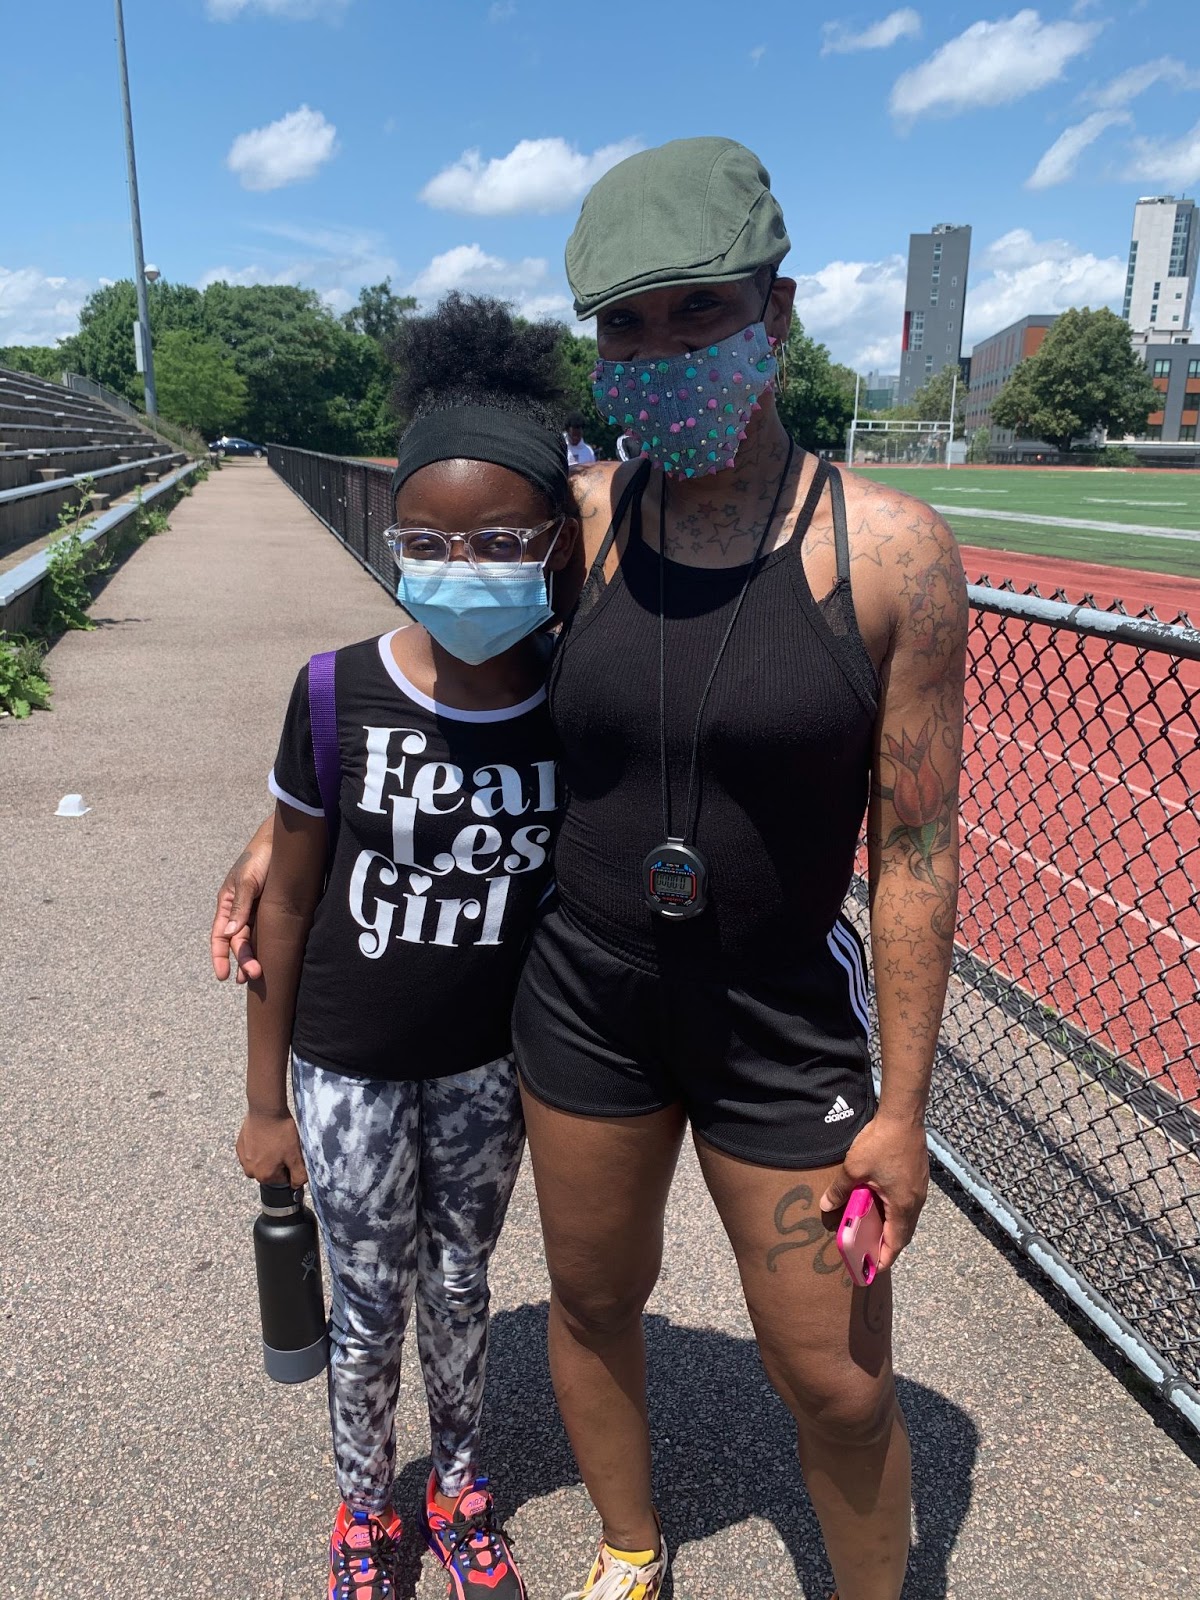 A woman standing with her arm around a little girl. An outdoor track for running is in the background, along with some trees.The sky is blue.